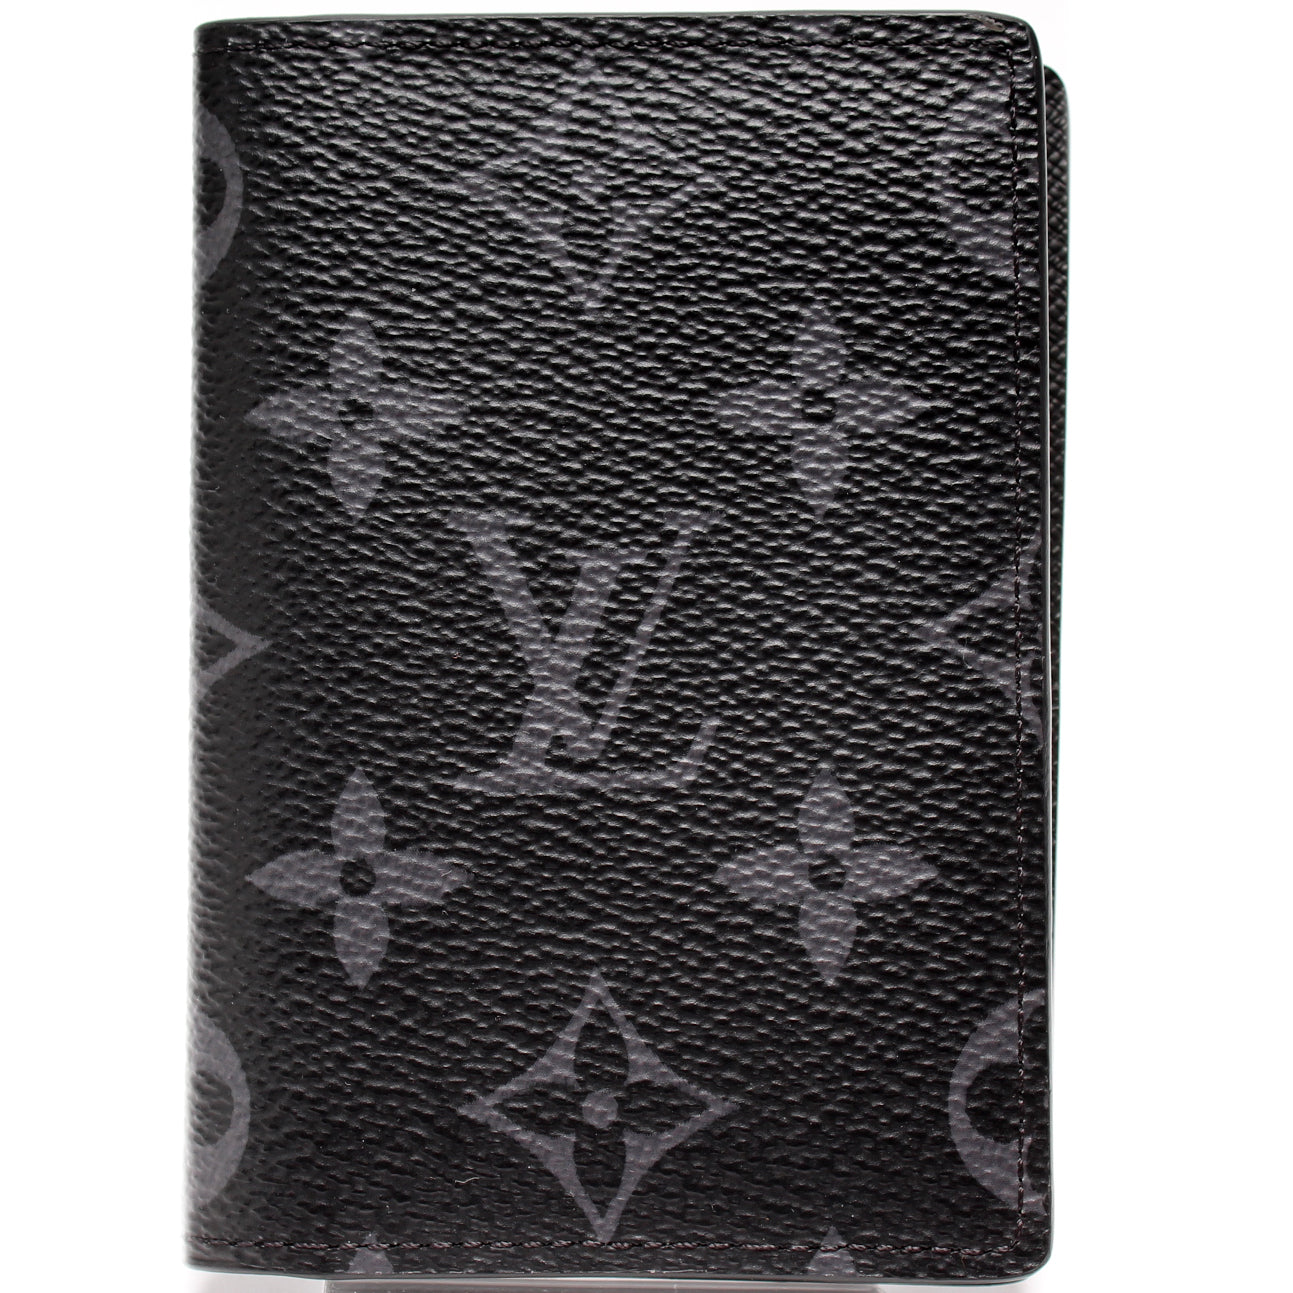 Pocket Organizer Monogram Eclipse - Wallets and Small Leather Goods